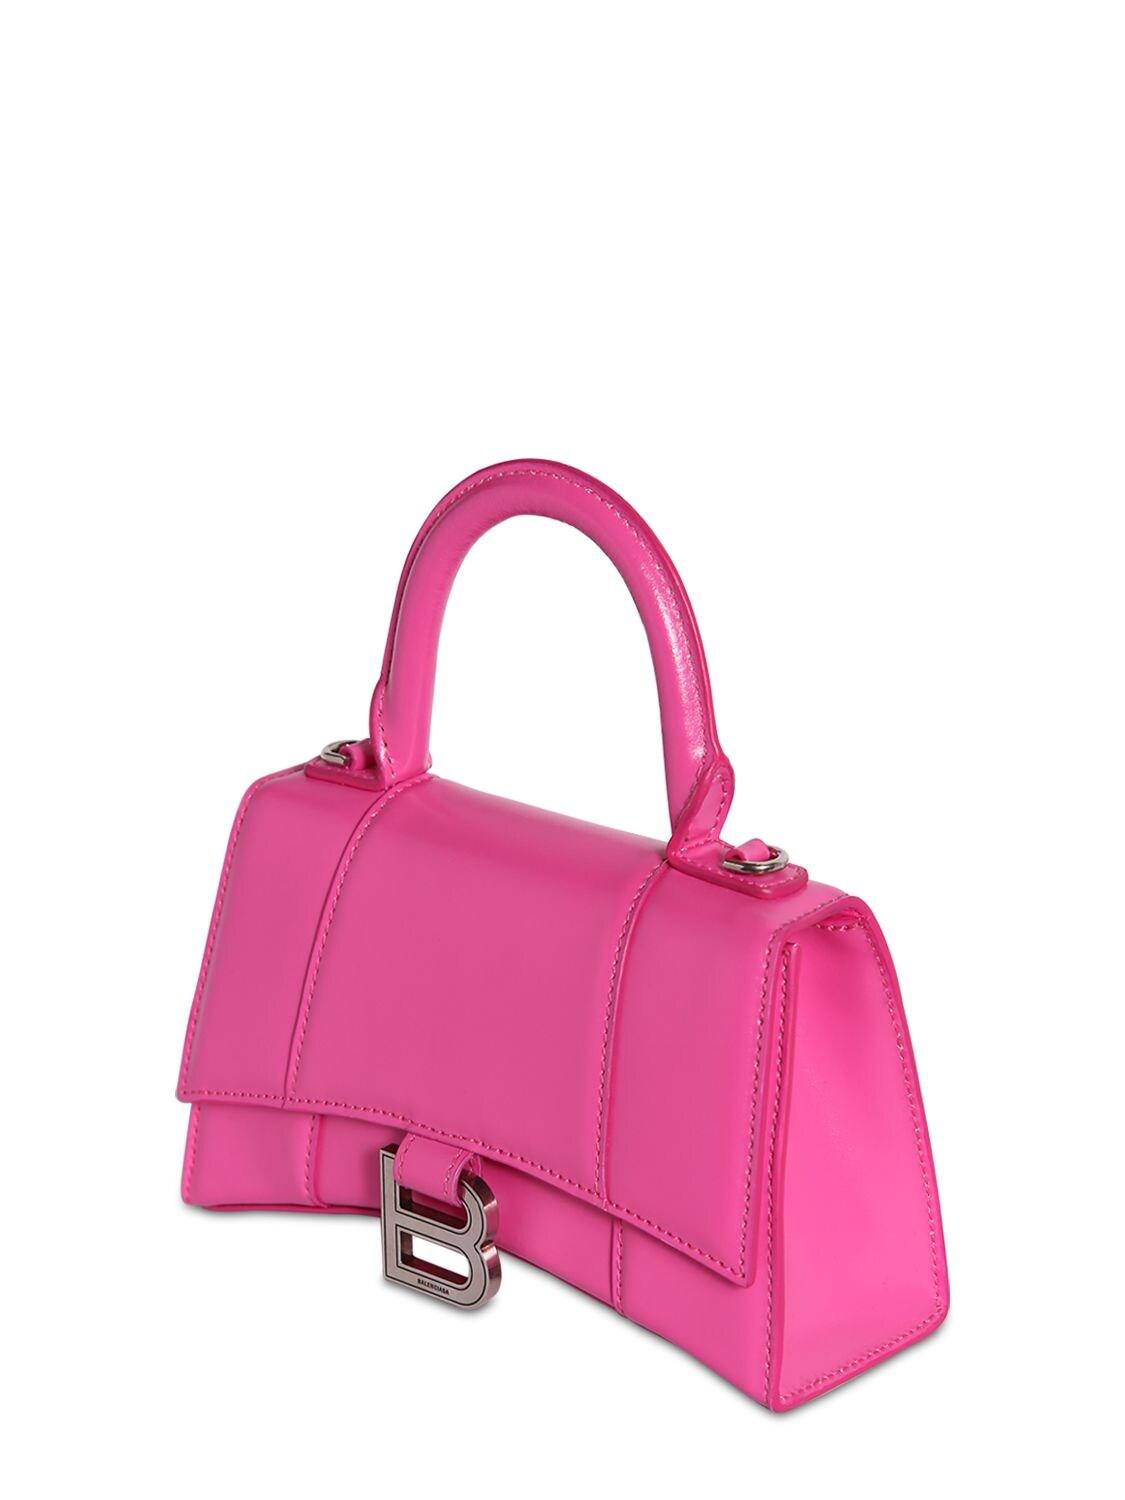 Balenciaga Xs Hourglass Smooth Leather Bag in Acid Fuchsia (Pink) - Lyst